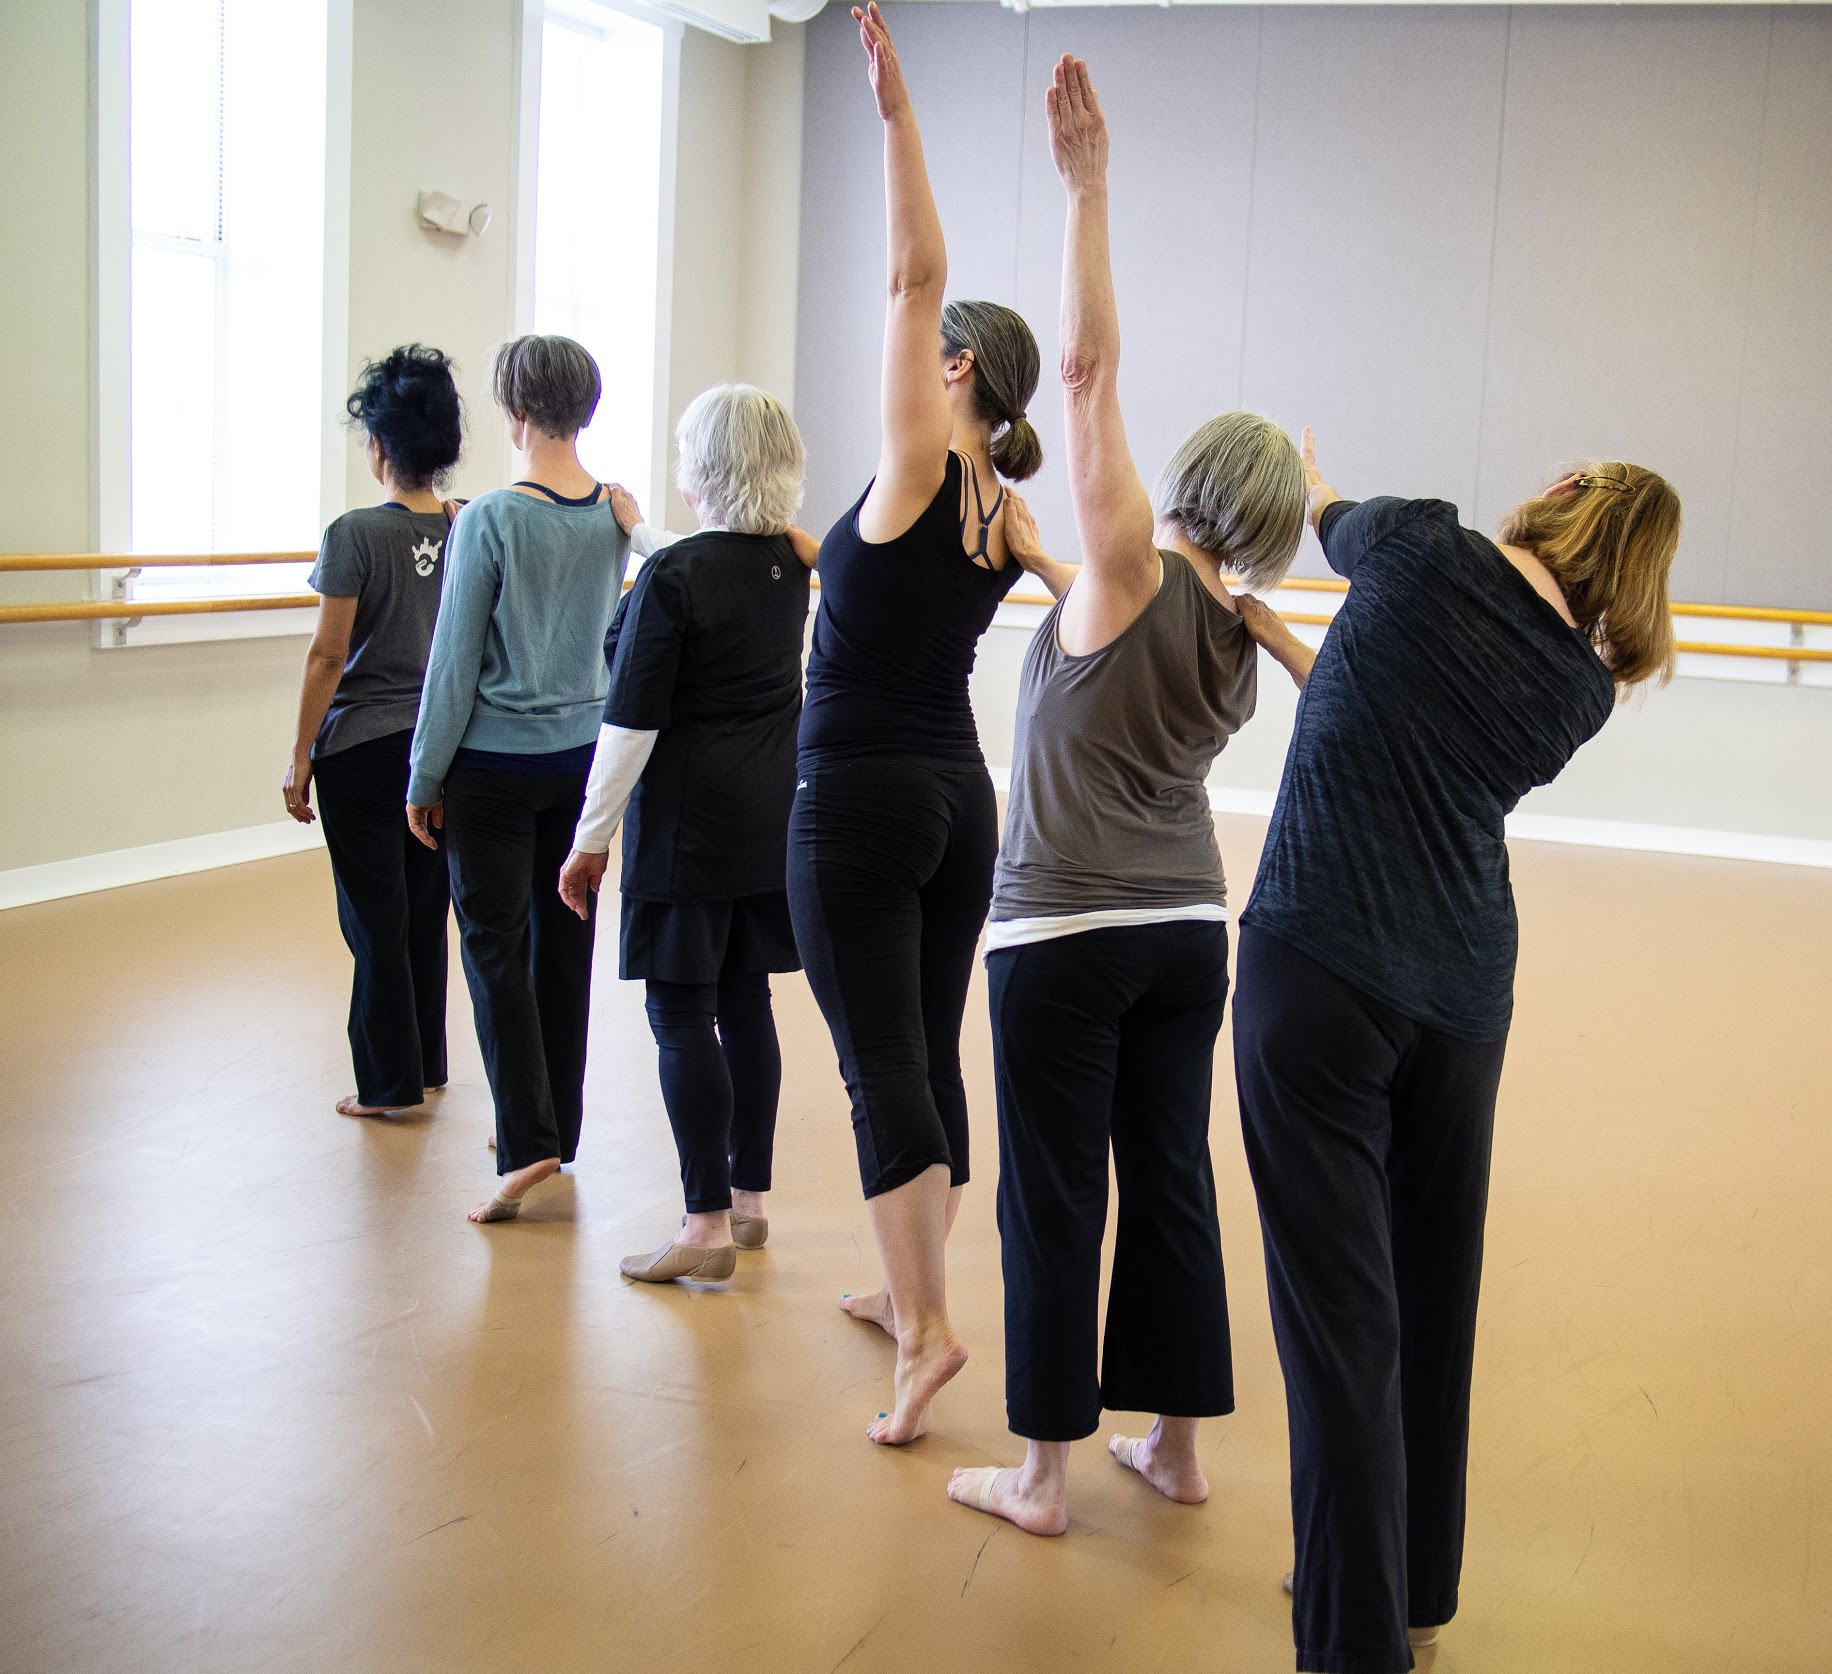 6 women in a diagonal line facing away from camera rehearse in a dance studio